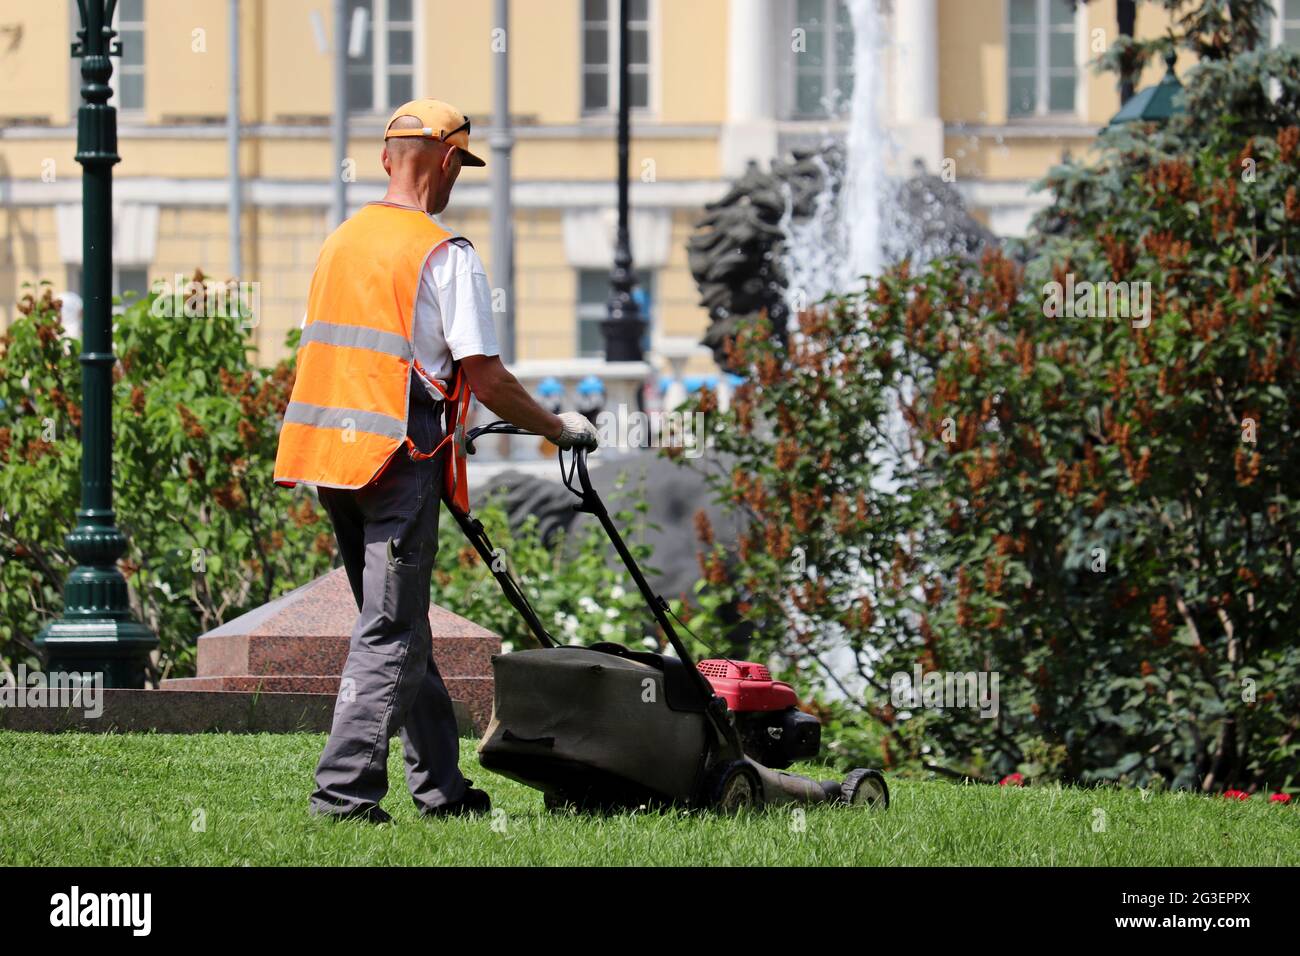 Gardener mowing the grass with lawn mower at summer. City park improvement in sunny day Stock Photo